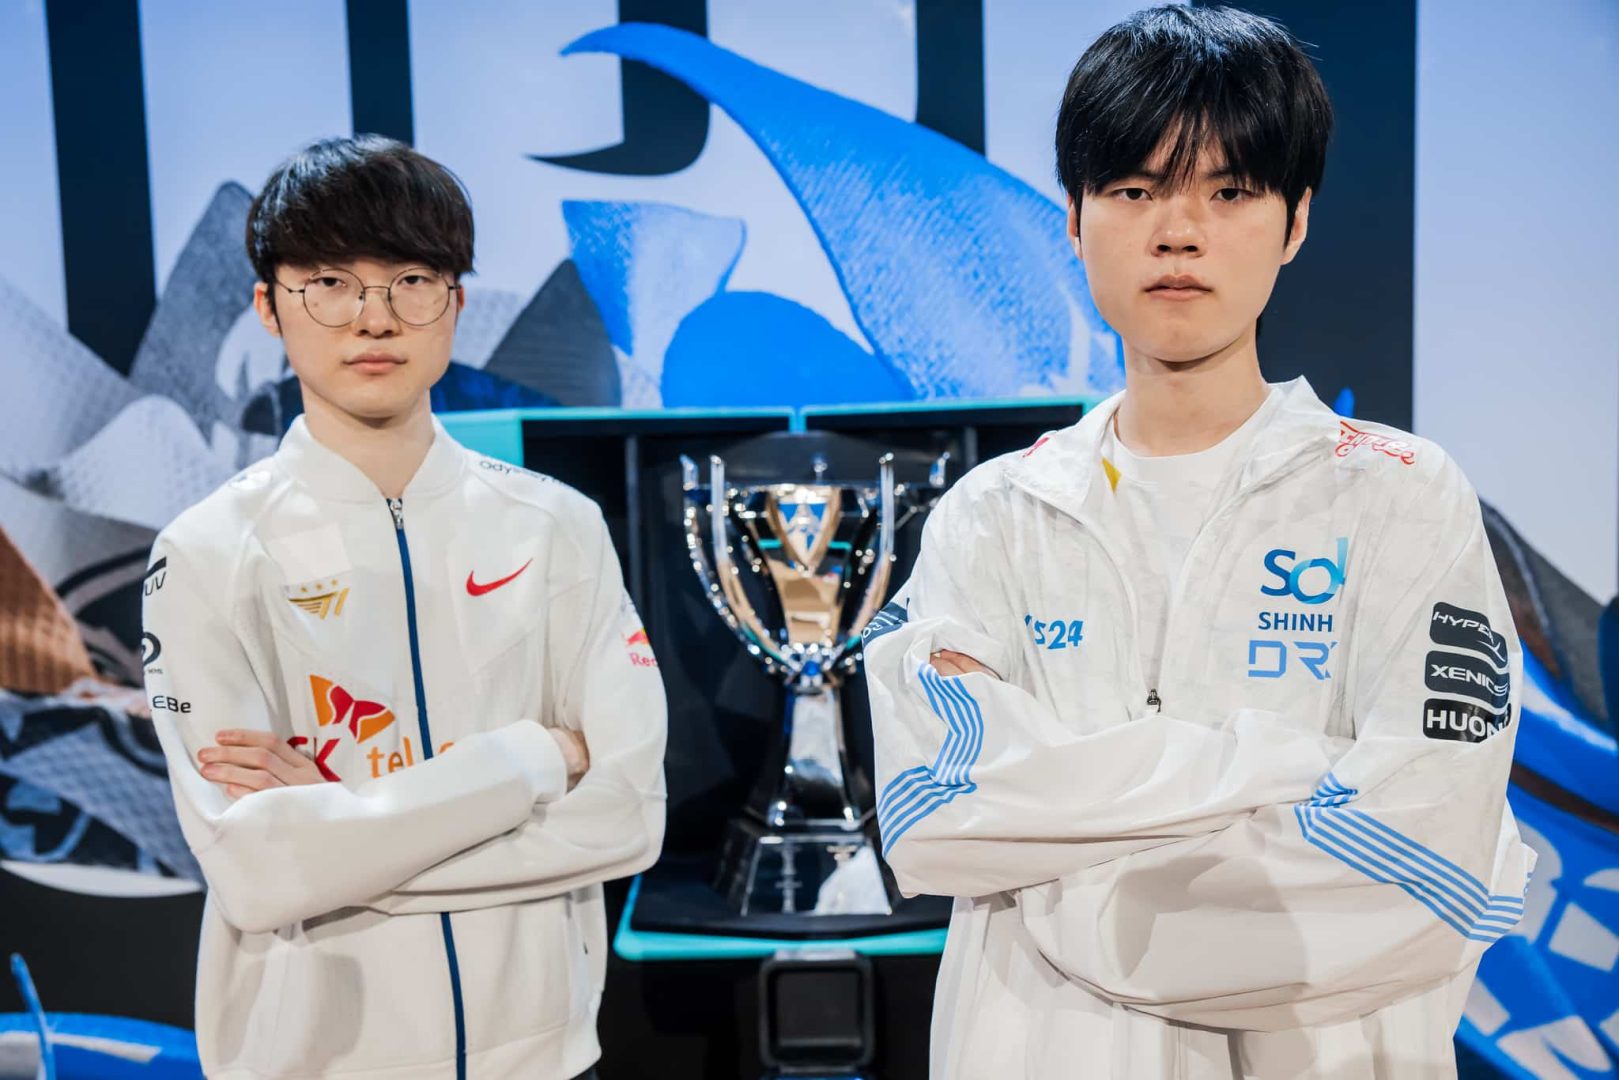 Here's what Faker said to Deft about winning Worlds - WIN.gg